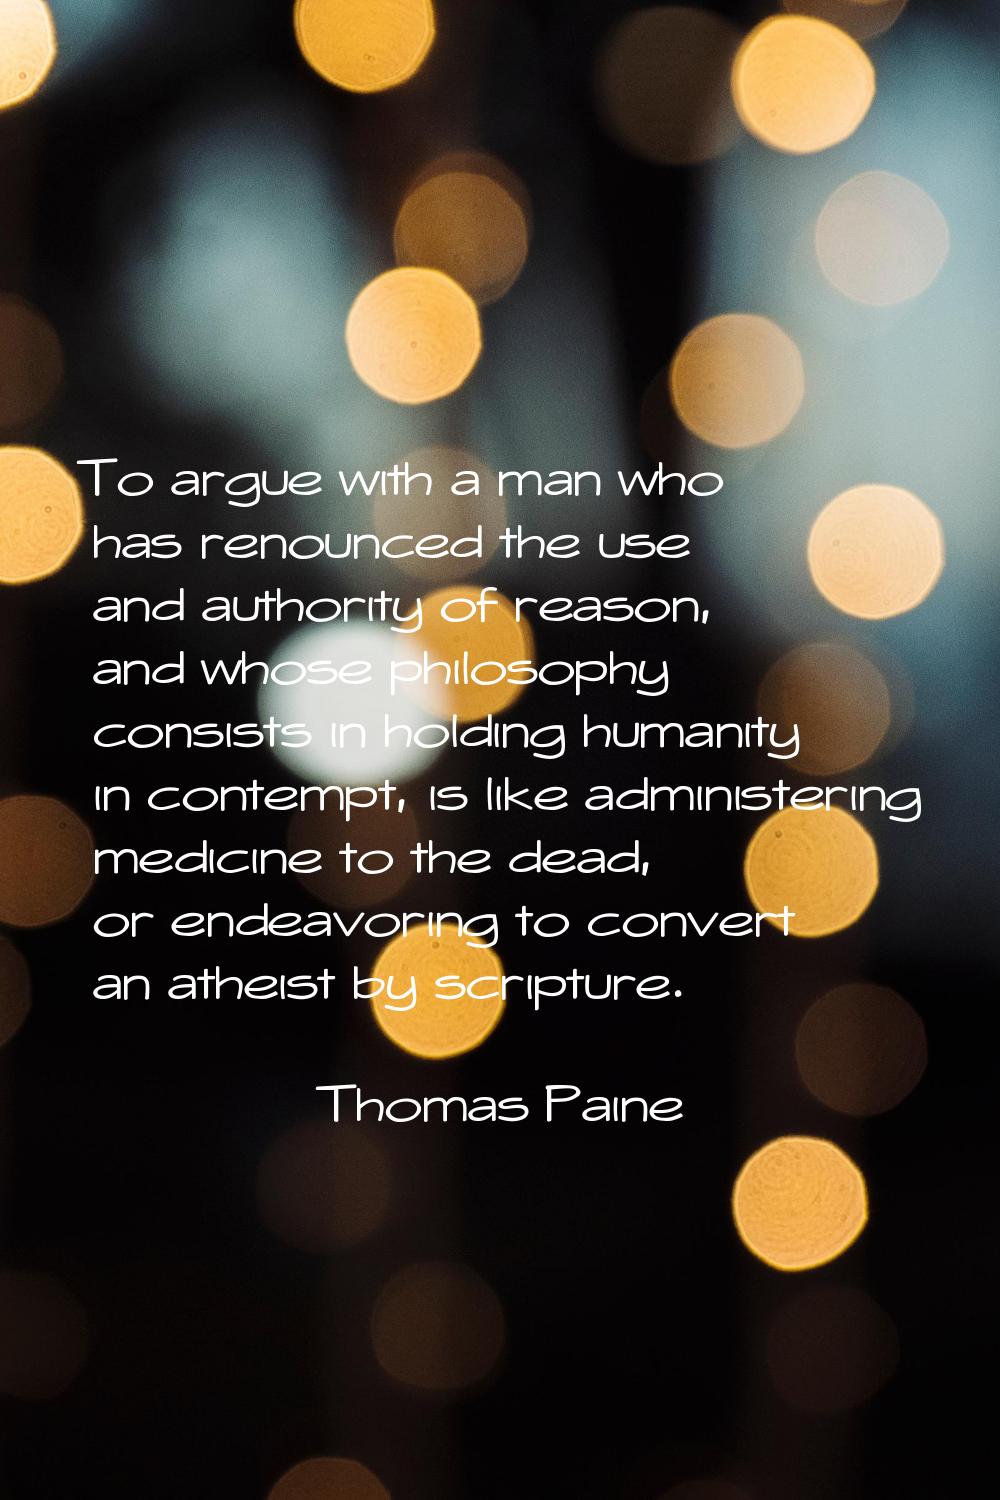 To argue with a man who has renounced the use and authority of reason, and whose philosophy consist